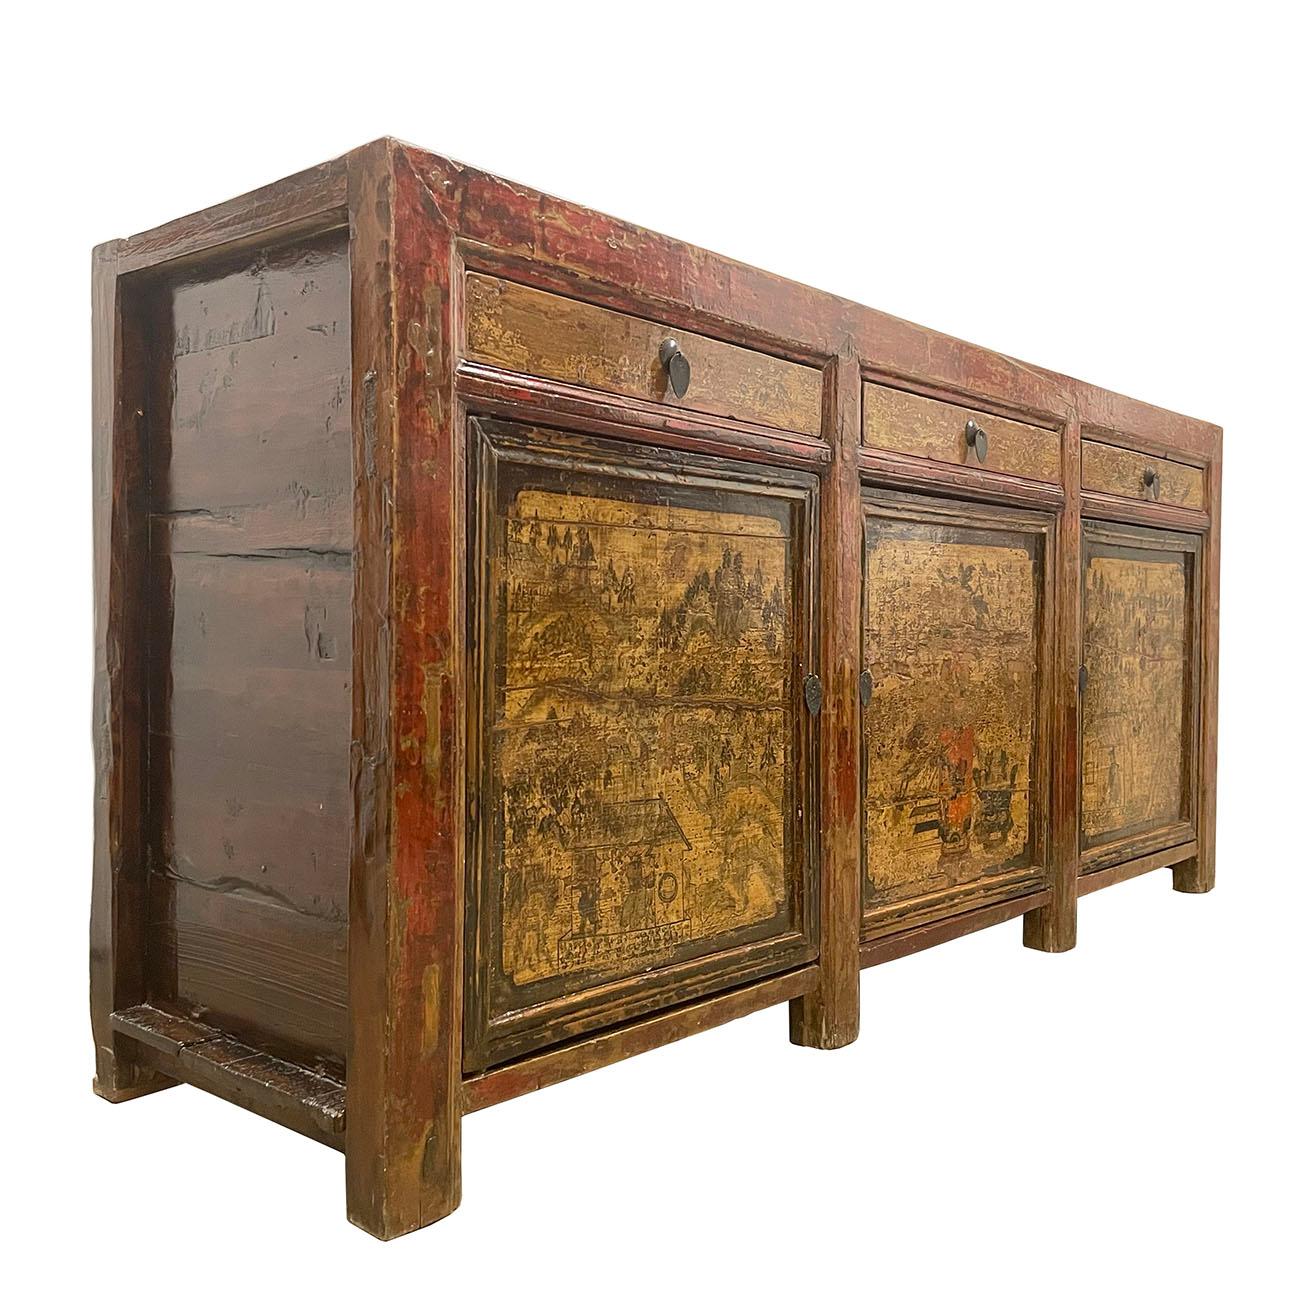 This Chinese antique hand painted Credenza has about 150 years history with lacquer painting on front. It is made of solid wood with beautiful hand painted Chinese forks arts on the front doors. It featured 3 single open door compartments on the